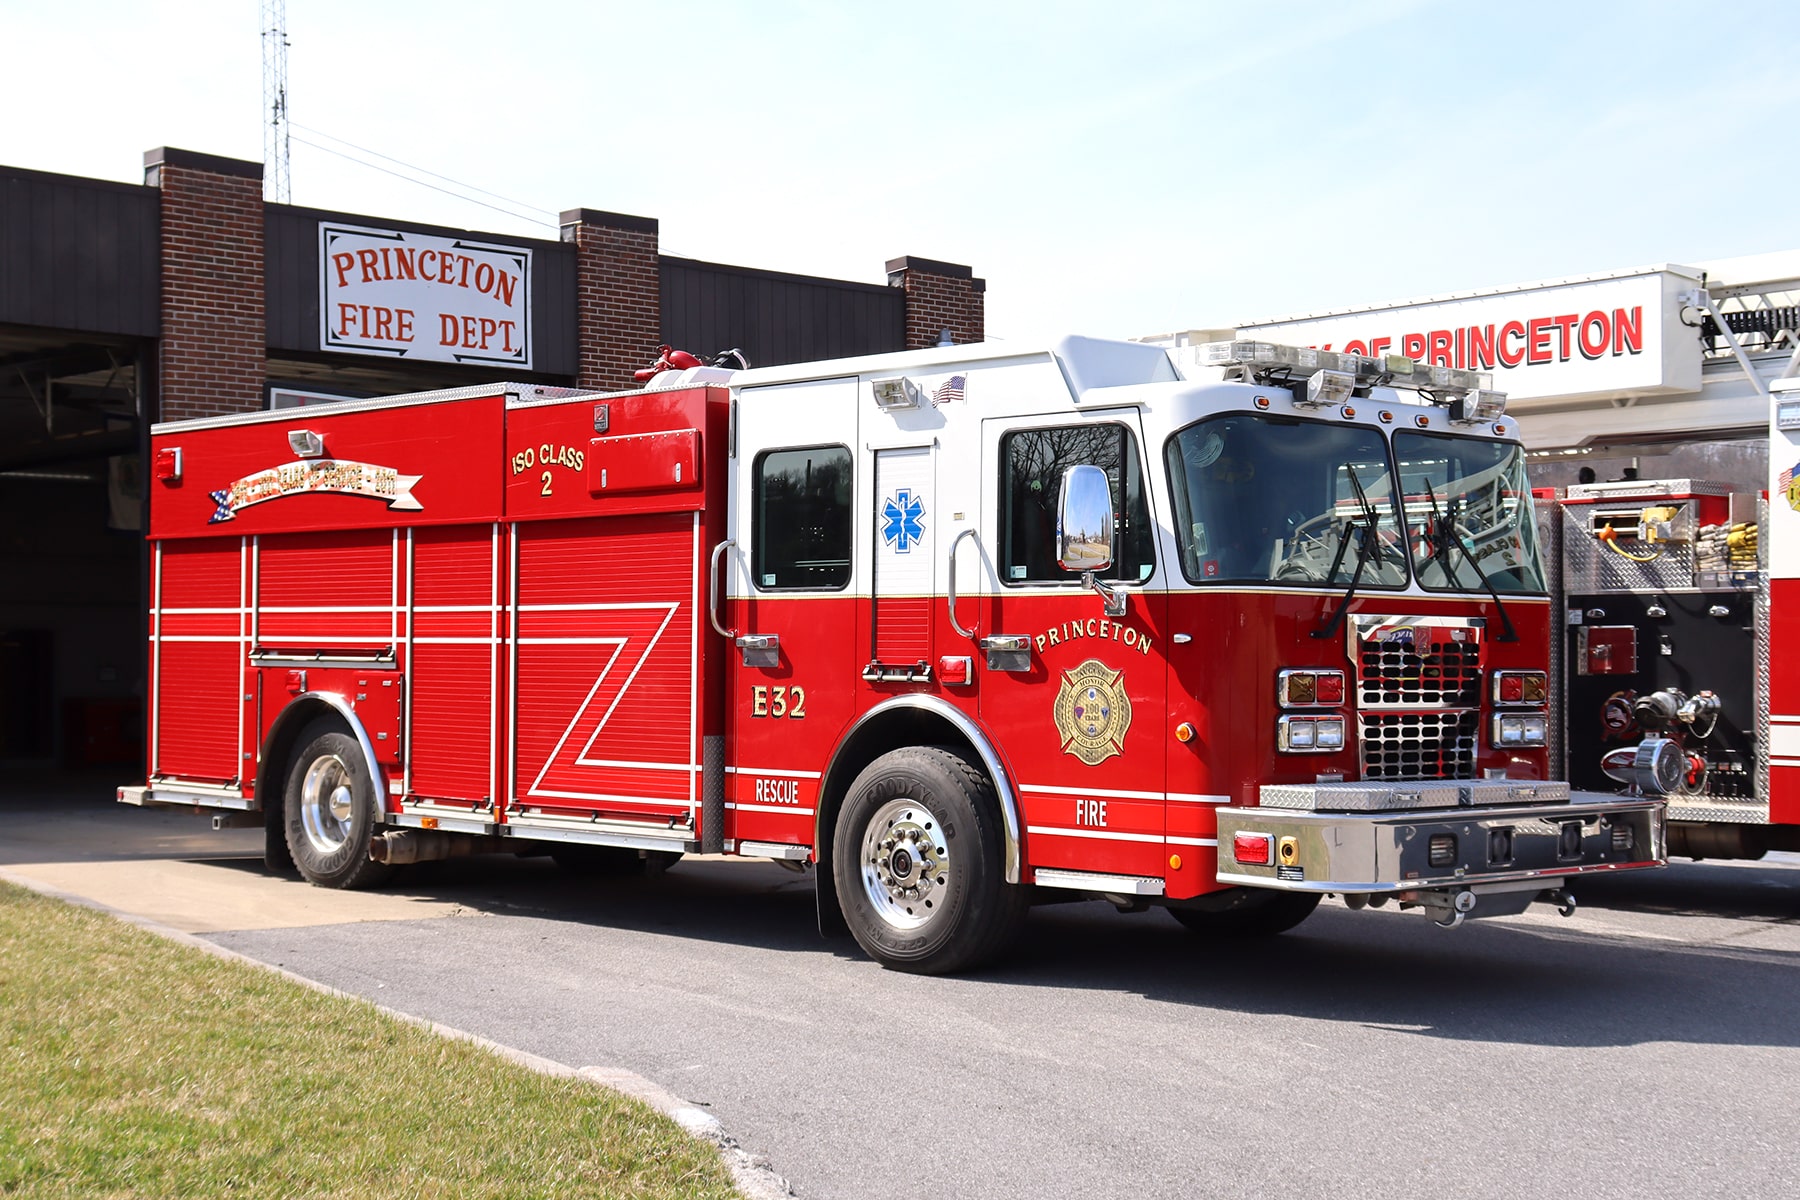 A City of Princeton fire truck in front of the fire station.